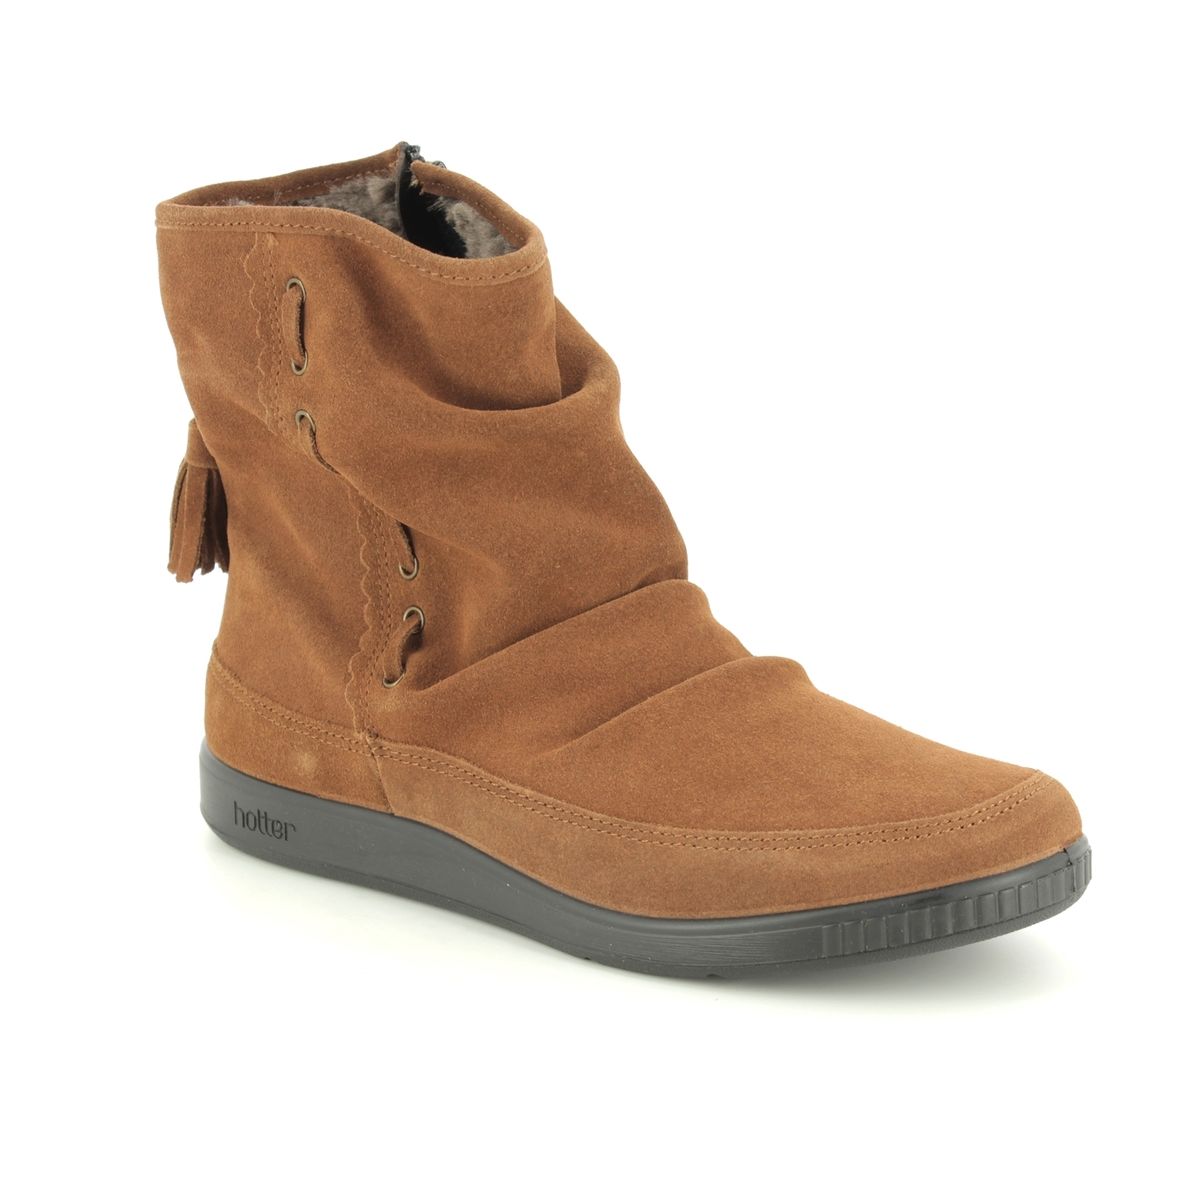 Hotter Pixie New E 8506-11 Tan Suede 